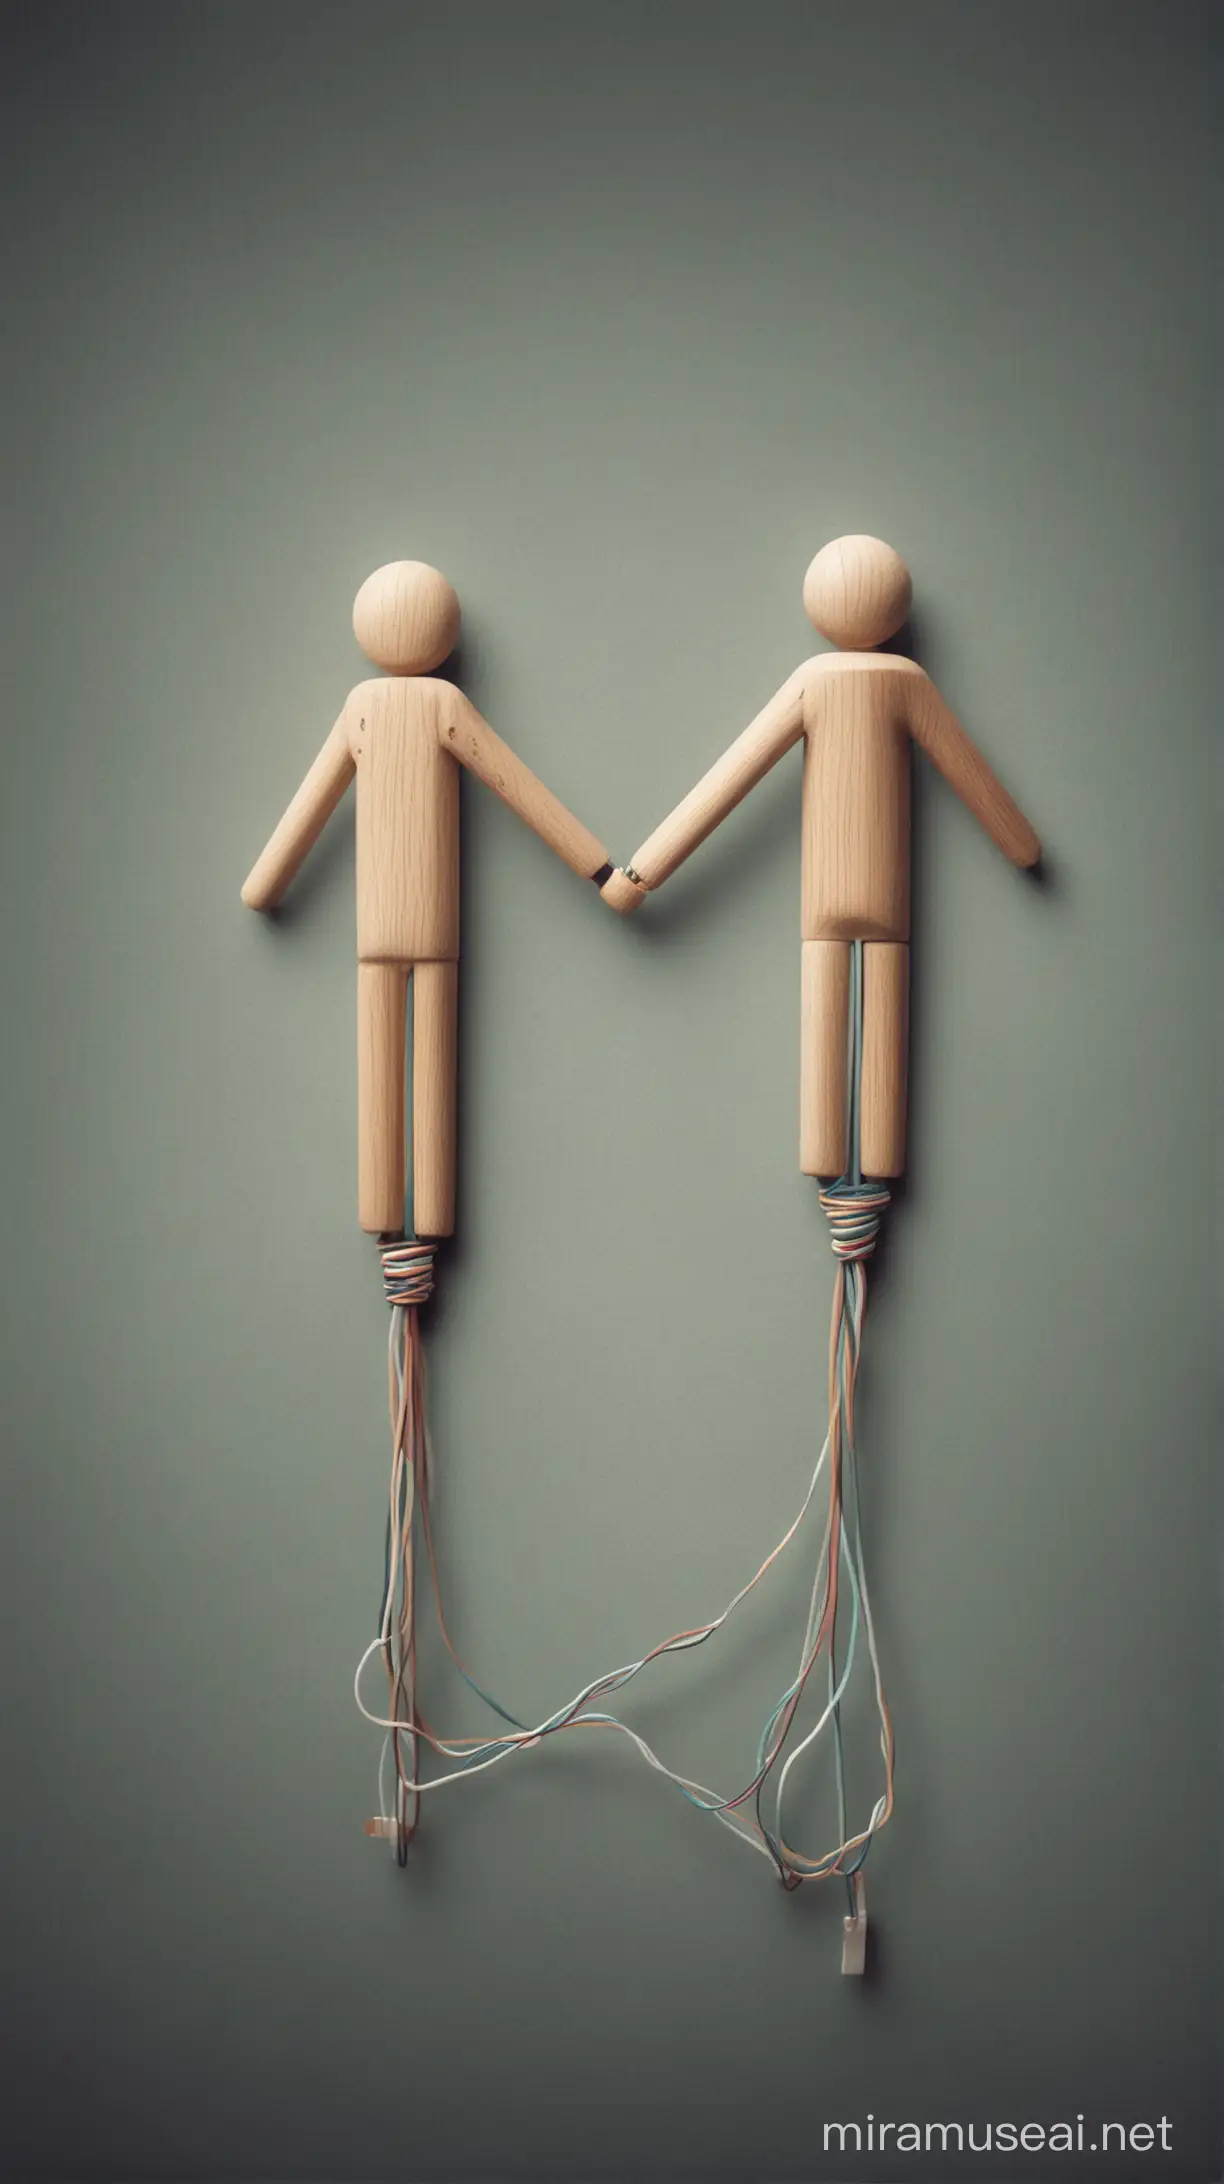 two people connected together